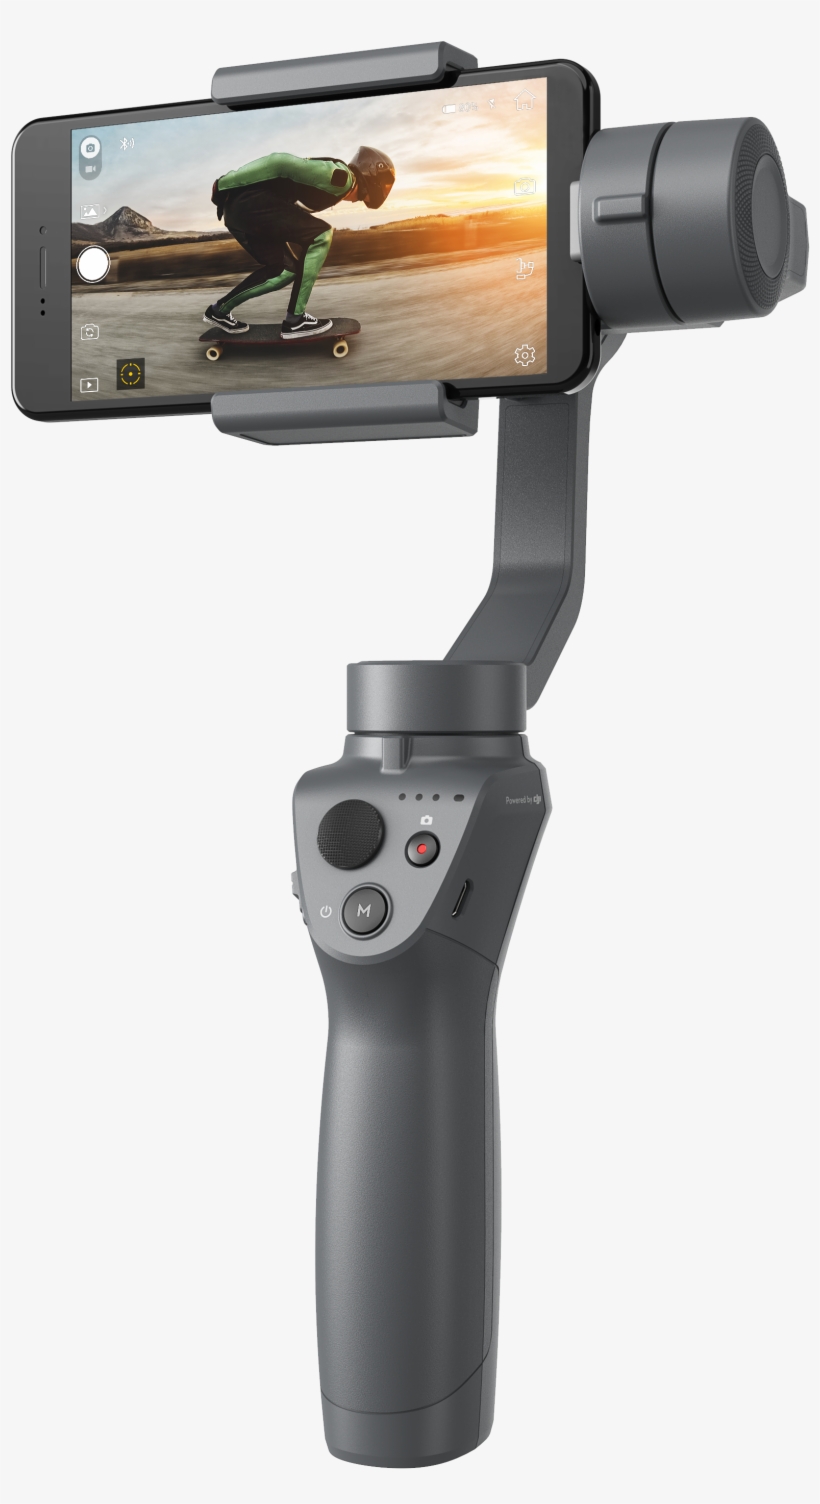 Dji Reveals New Handheld Camera Stabilizers At Ces - Dji Osmo Mobile 2, transparent png #7981669